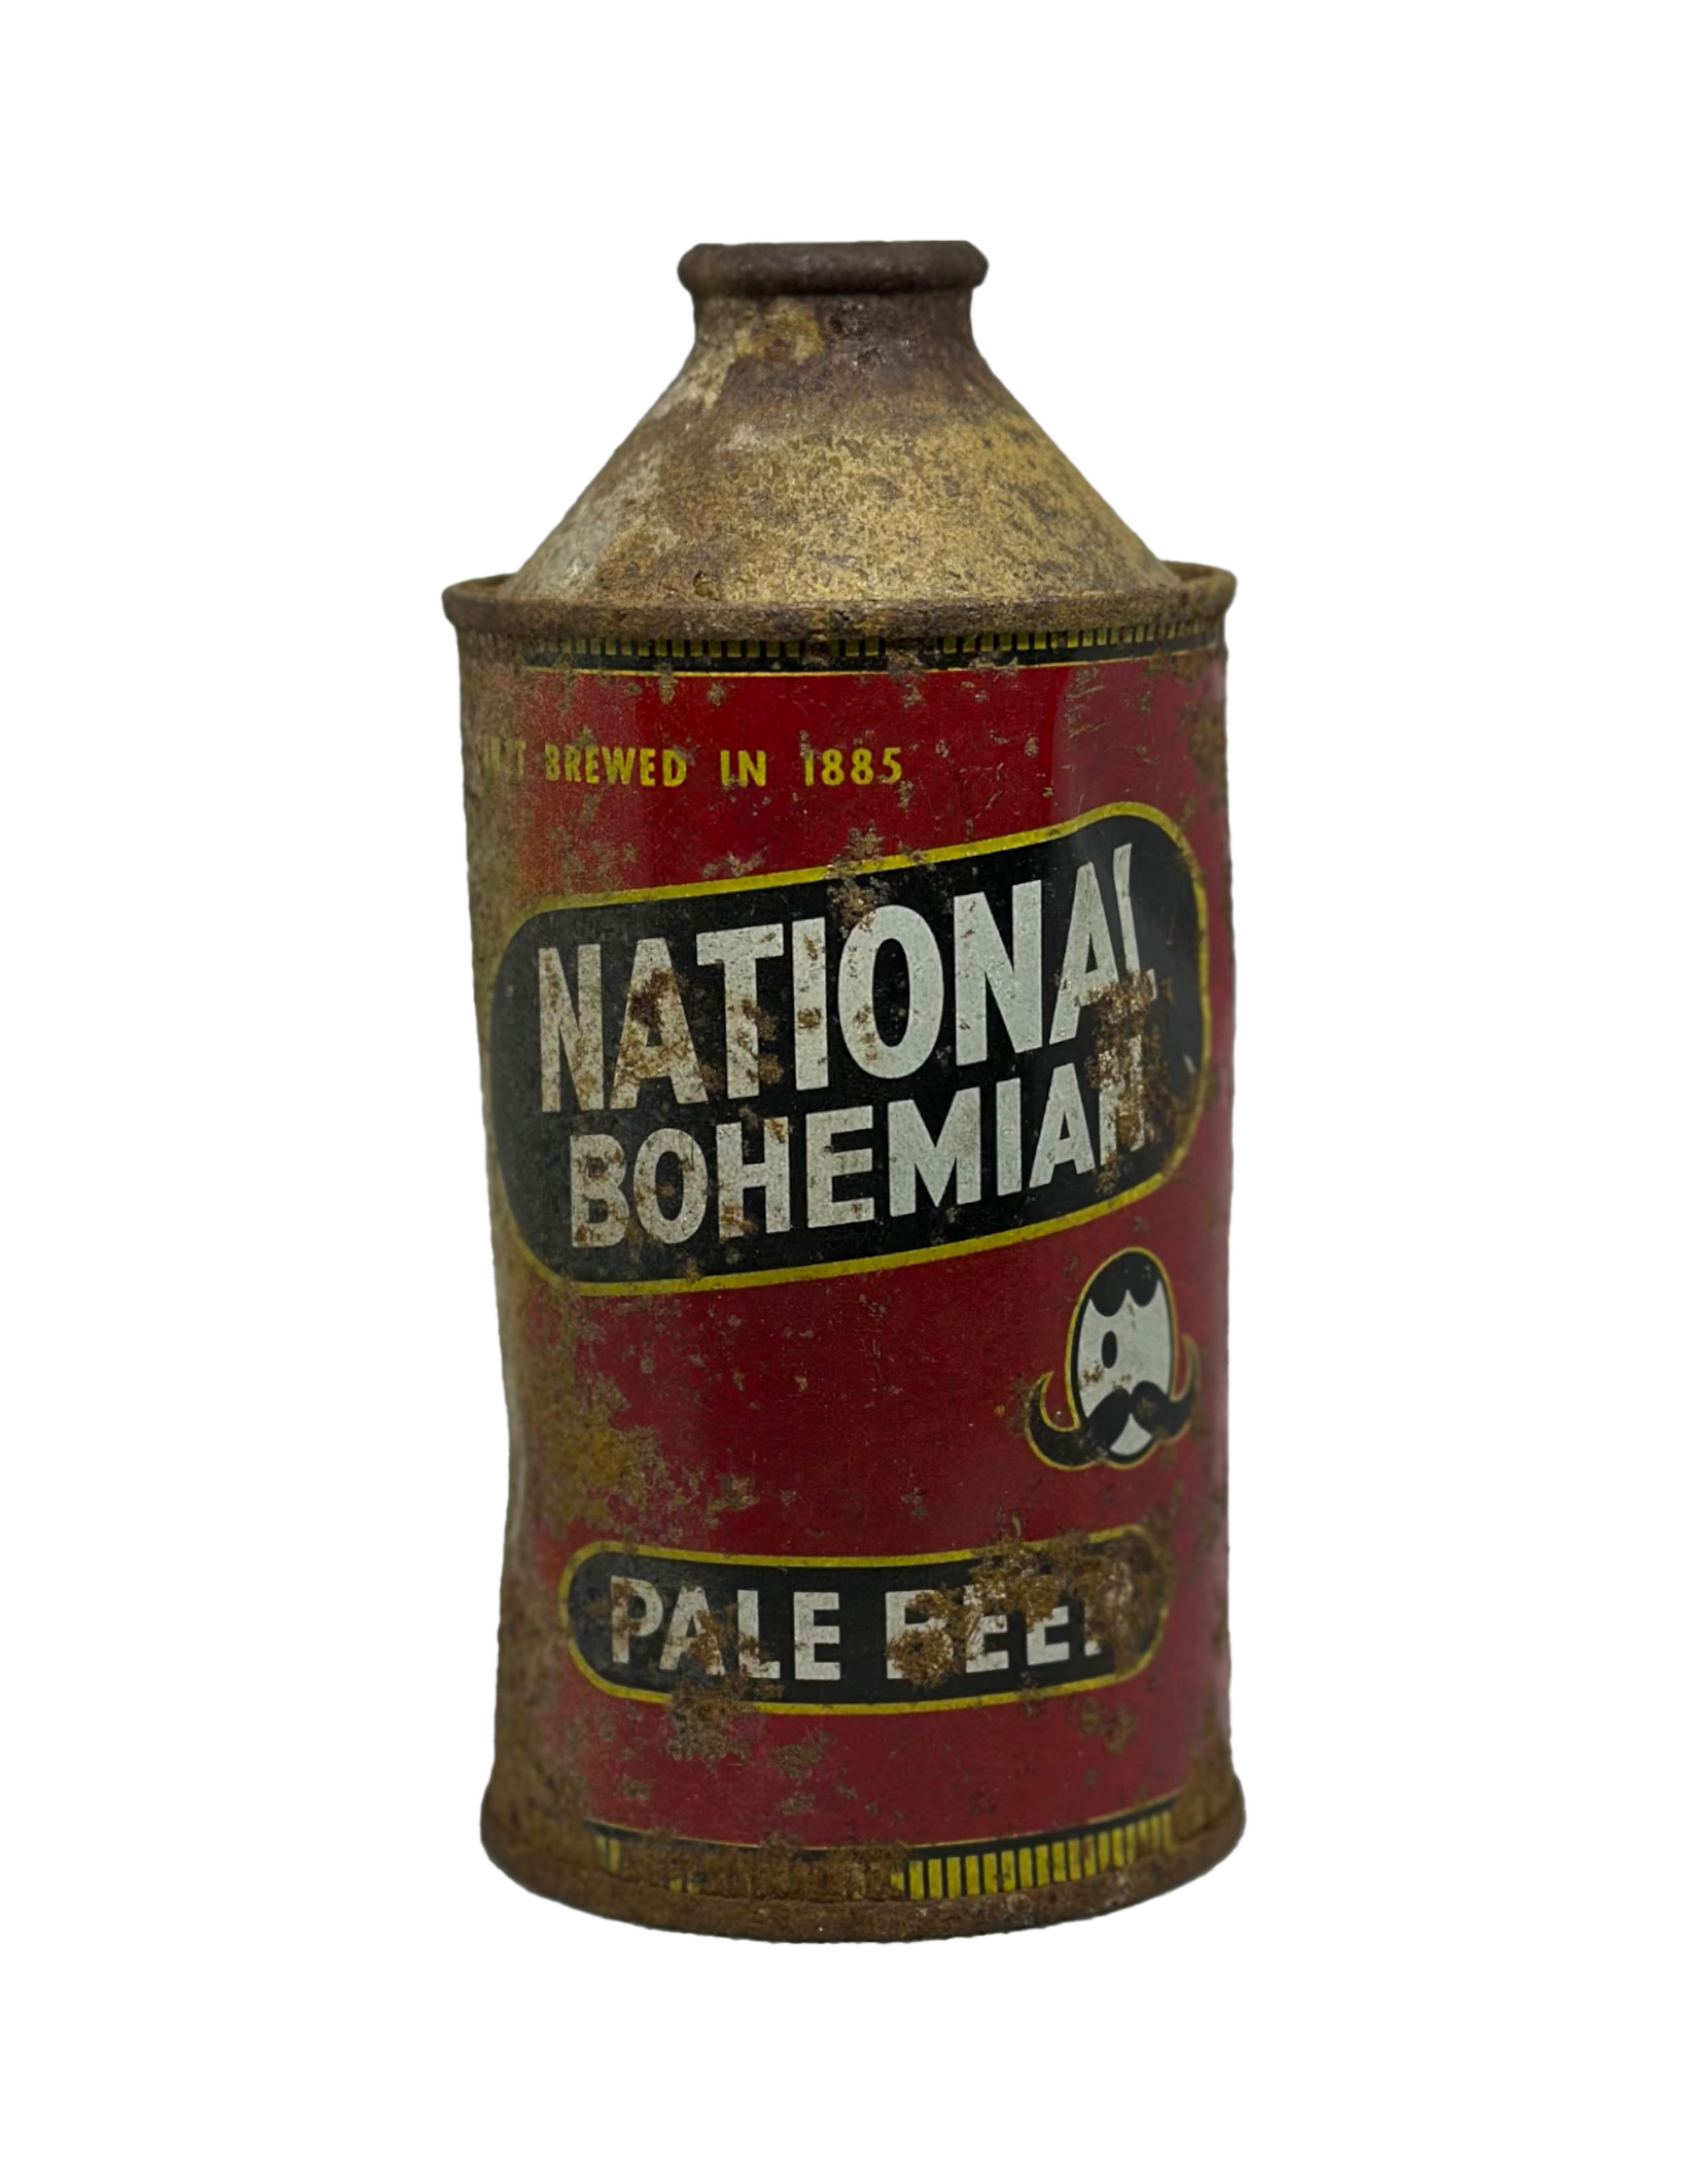 national bohemian beer can with a cone-top design, red label, and black and white logo